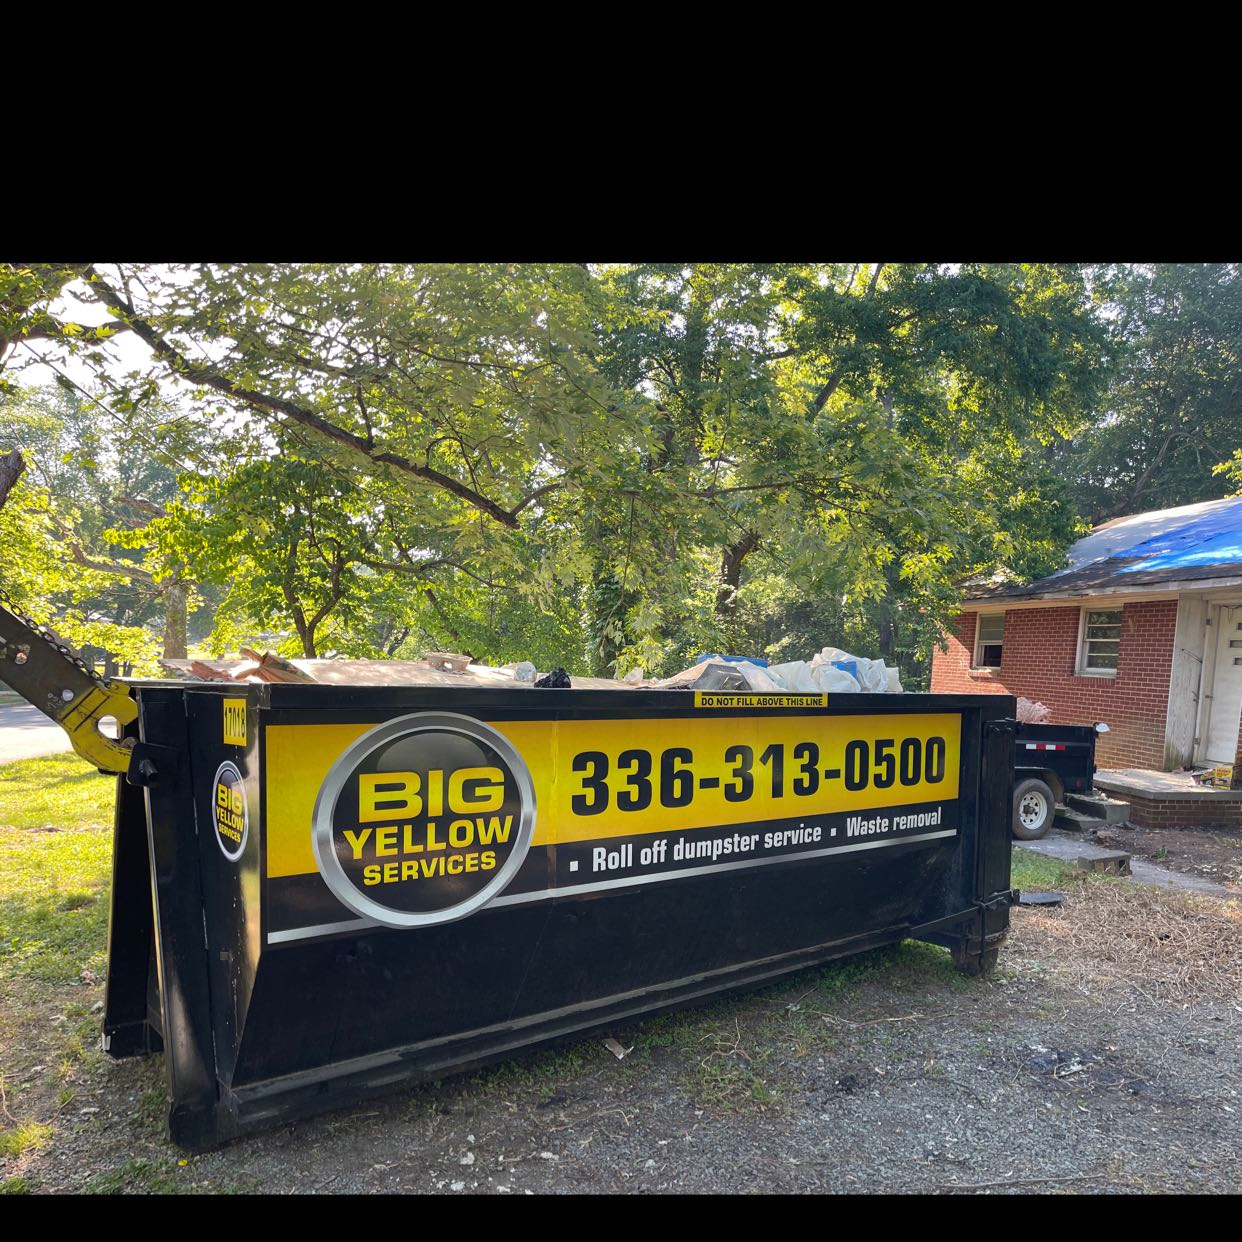 A-1933 Wilkins Street Burlington, NC 27217 Terms of Use | Roll-Off Dumpster Rentals | Big Yellow Services